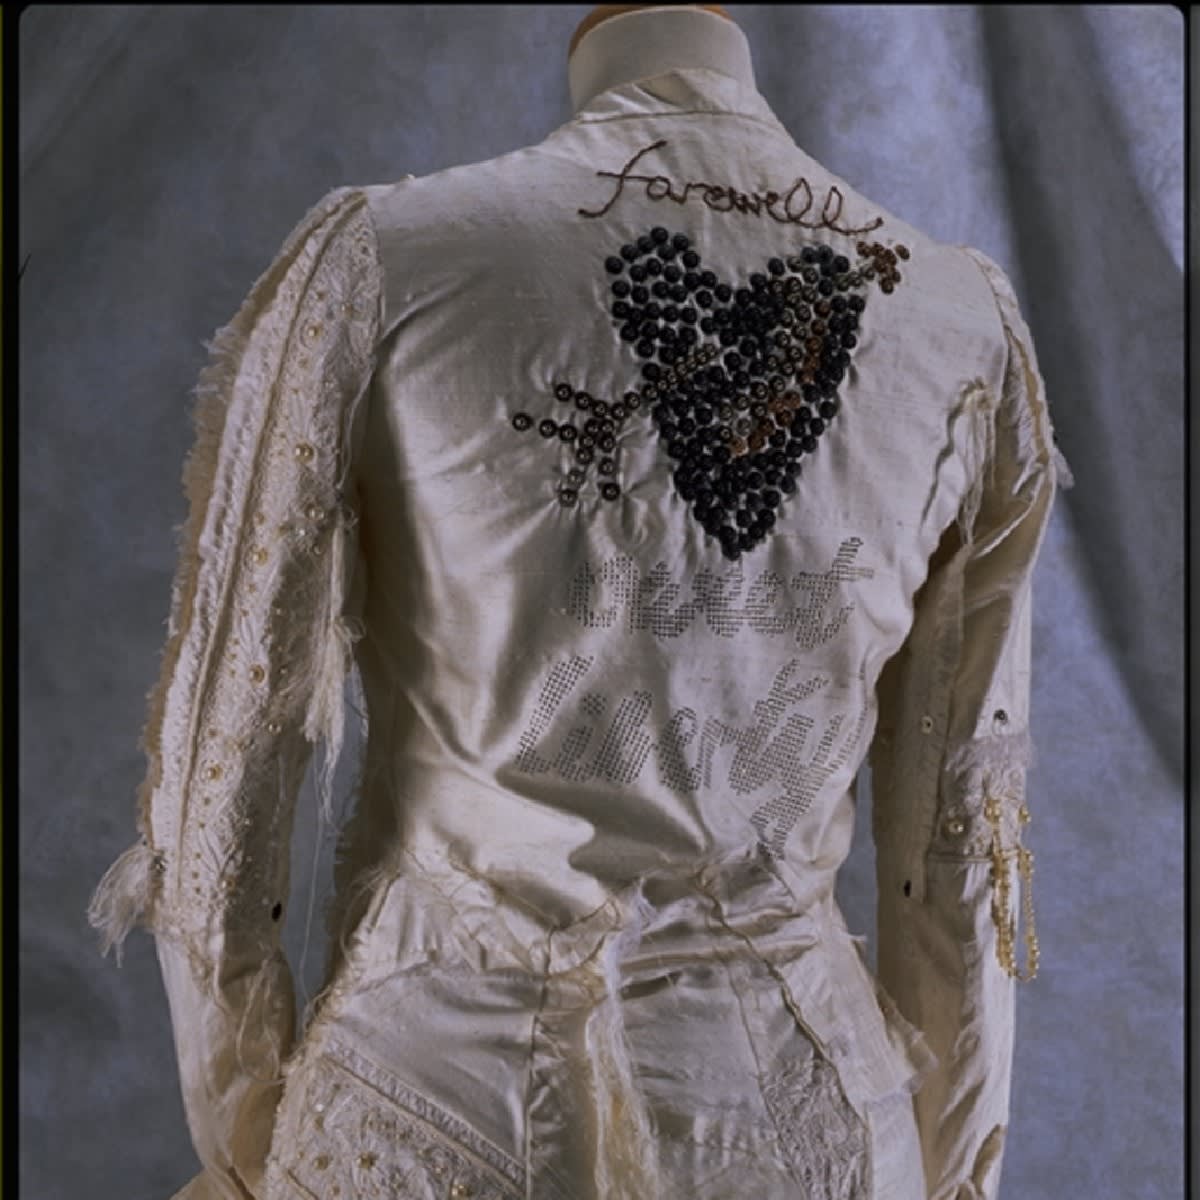 Think punk, but also wedding chic Liberty commissioned Joe Casely-Hayford to create a garment for their display of wedding dresses by British designers in 1992. Using traditional materials but with fraying, patchwork, and metal rivets, he makes it entirely unconventional